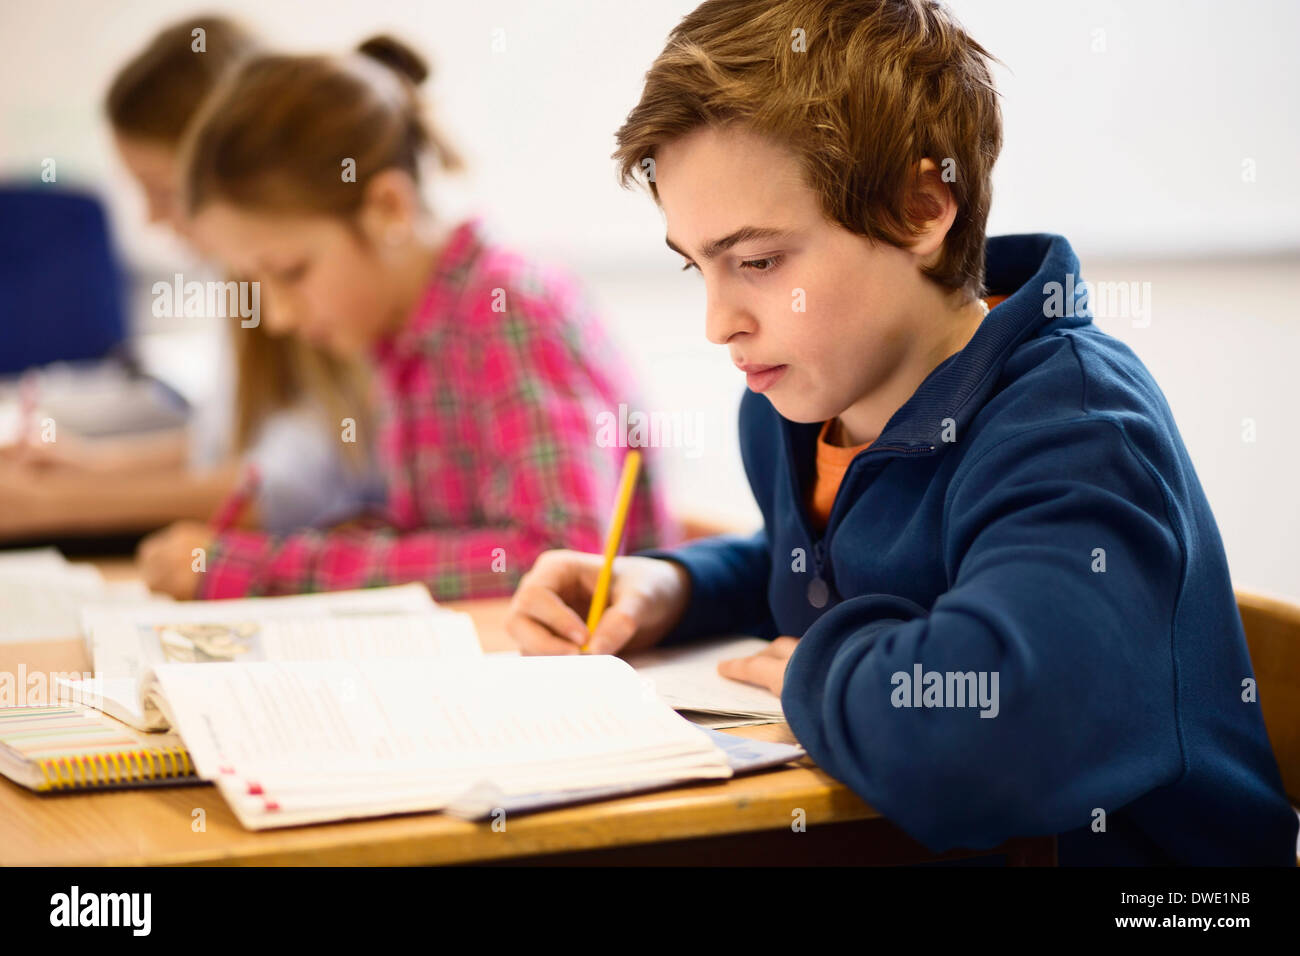 High school students studying at desk in classroom Stock Photo